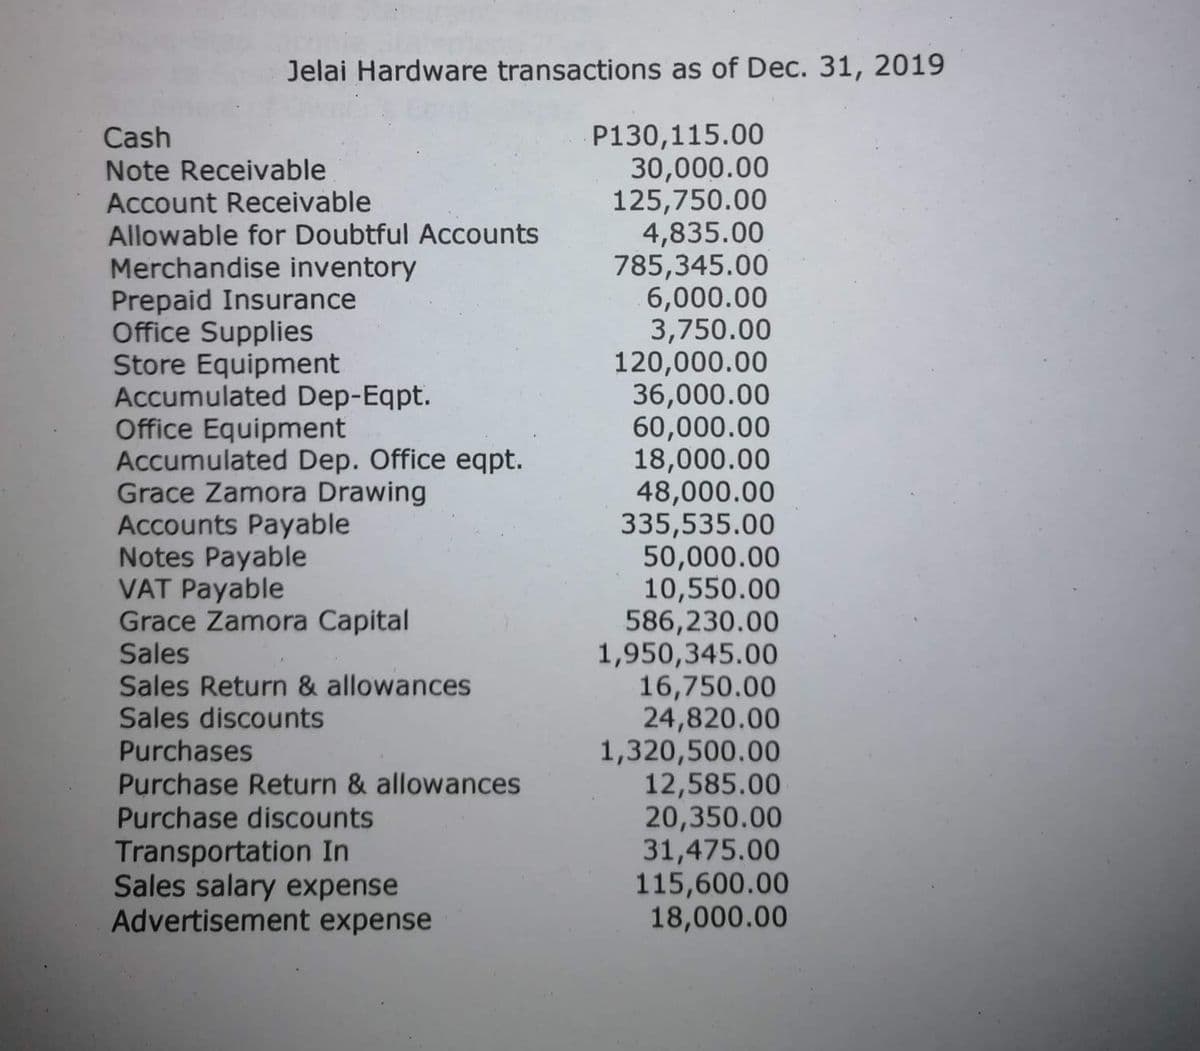 Jelai Hardware transactions as of Dec. 31, 2019
Cash
Note Receivable
Account Receivable
Allowable for Doubtful Accounts
Merchandise inventory
Prepaid Insurance
Office Supplies
Store Equipment
Accumulated Dep-Eqpt.
Office Equipment
Accumulated Dep. Office eqpt.
Grace Zamora Drawing
Accounts Payable
Notes Payable
VAT Payable
Grace Zamora Capital
Sales
Sales Return & allowances
Sales discounts
Purchases
P130,115.00
30,000.00
125,750.00
4,835.00
785,345.00
6,000.00
3,750.00
120,000.00
36,000.00
60,000.00
18,000.00
48,000.00
335,535.00
50,000.00
10,550.00
586,230.00
1,950,345.00
16,750.00
24,820.00
1,320,500.00
12,585.00
20,350.00
31,475.00
115,600.00
18,000.00
Purchase Return & allowances
Purchase discounts
Transportation In
Sales salary expense
Advertisement expense
